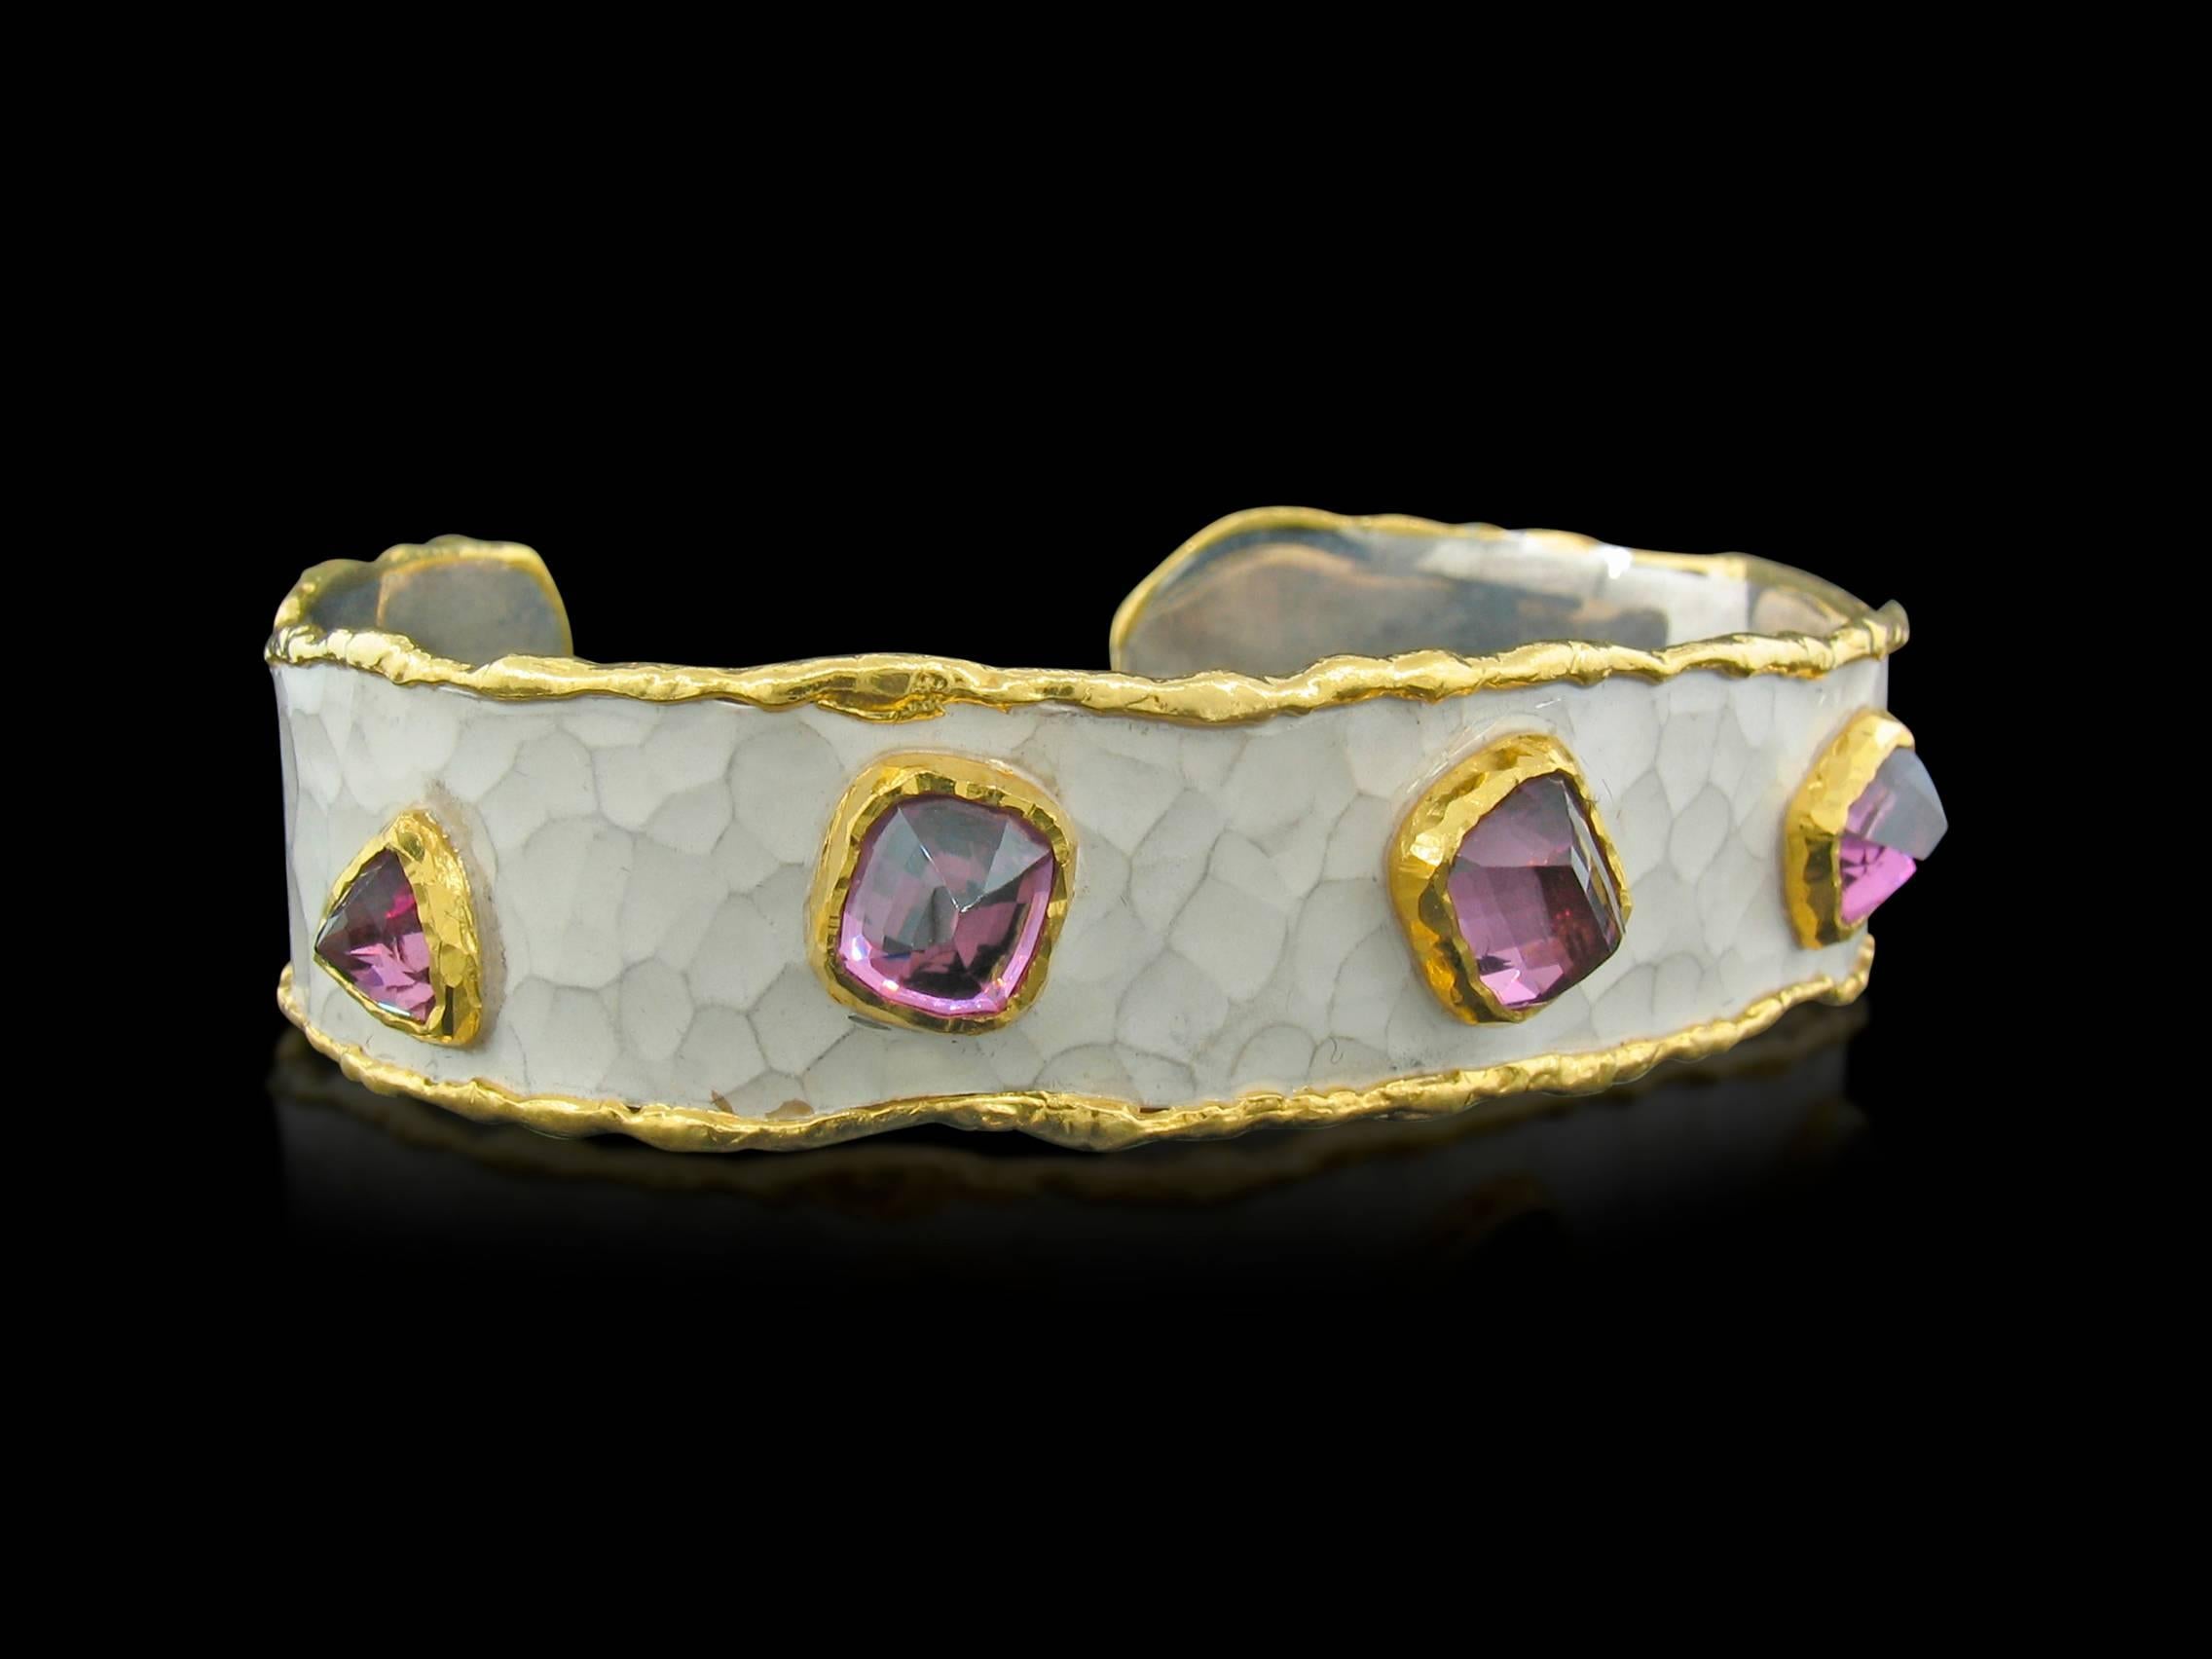 This is a fabulous Cuff designed and made by well known designer Victor Velyan who makes the most comfortable cuffs in the industry.  They can be custom fitted to your wrist.  This one contains 5 Raspberry colored Garnets weighing a total of 7.62